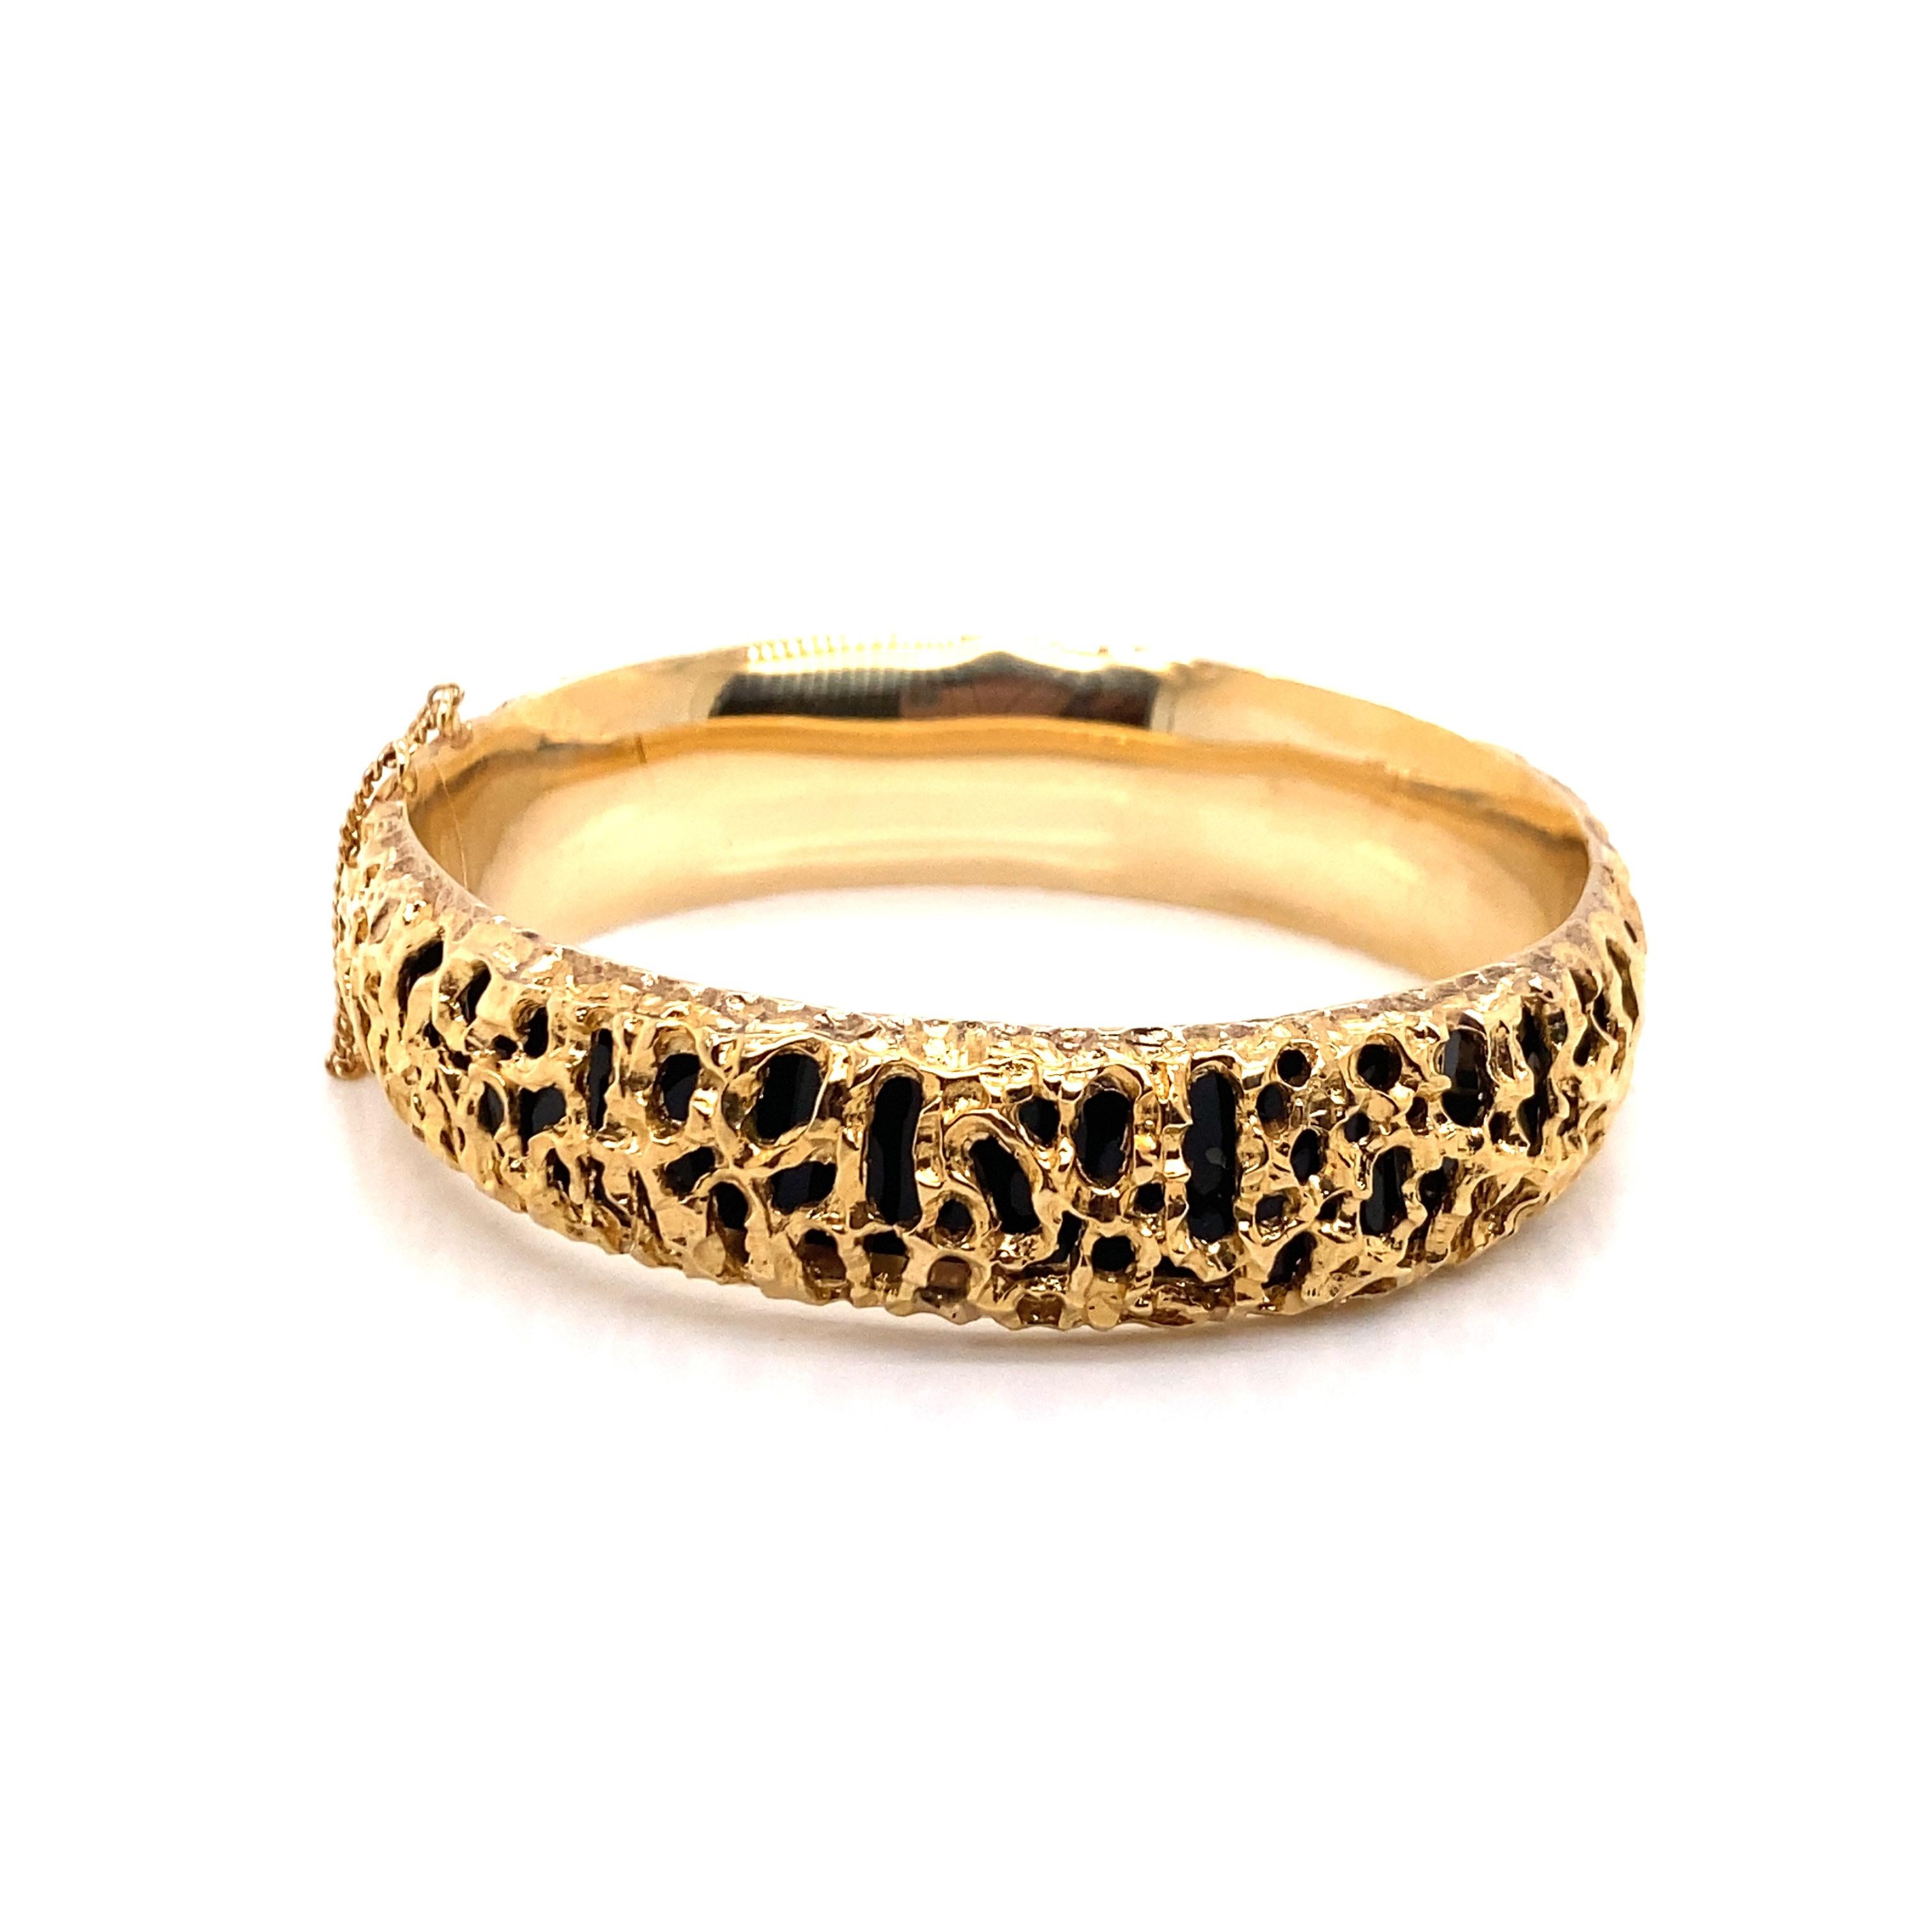 Contemporary Vintage 1980's 14K Yellow Gold Bangle Bracelet with Filigree and Onyx For Sale